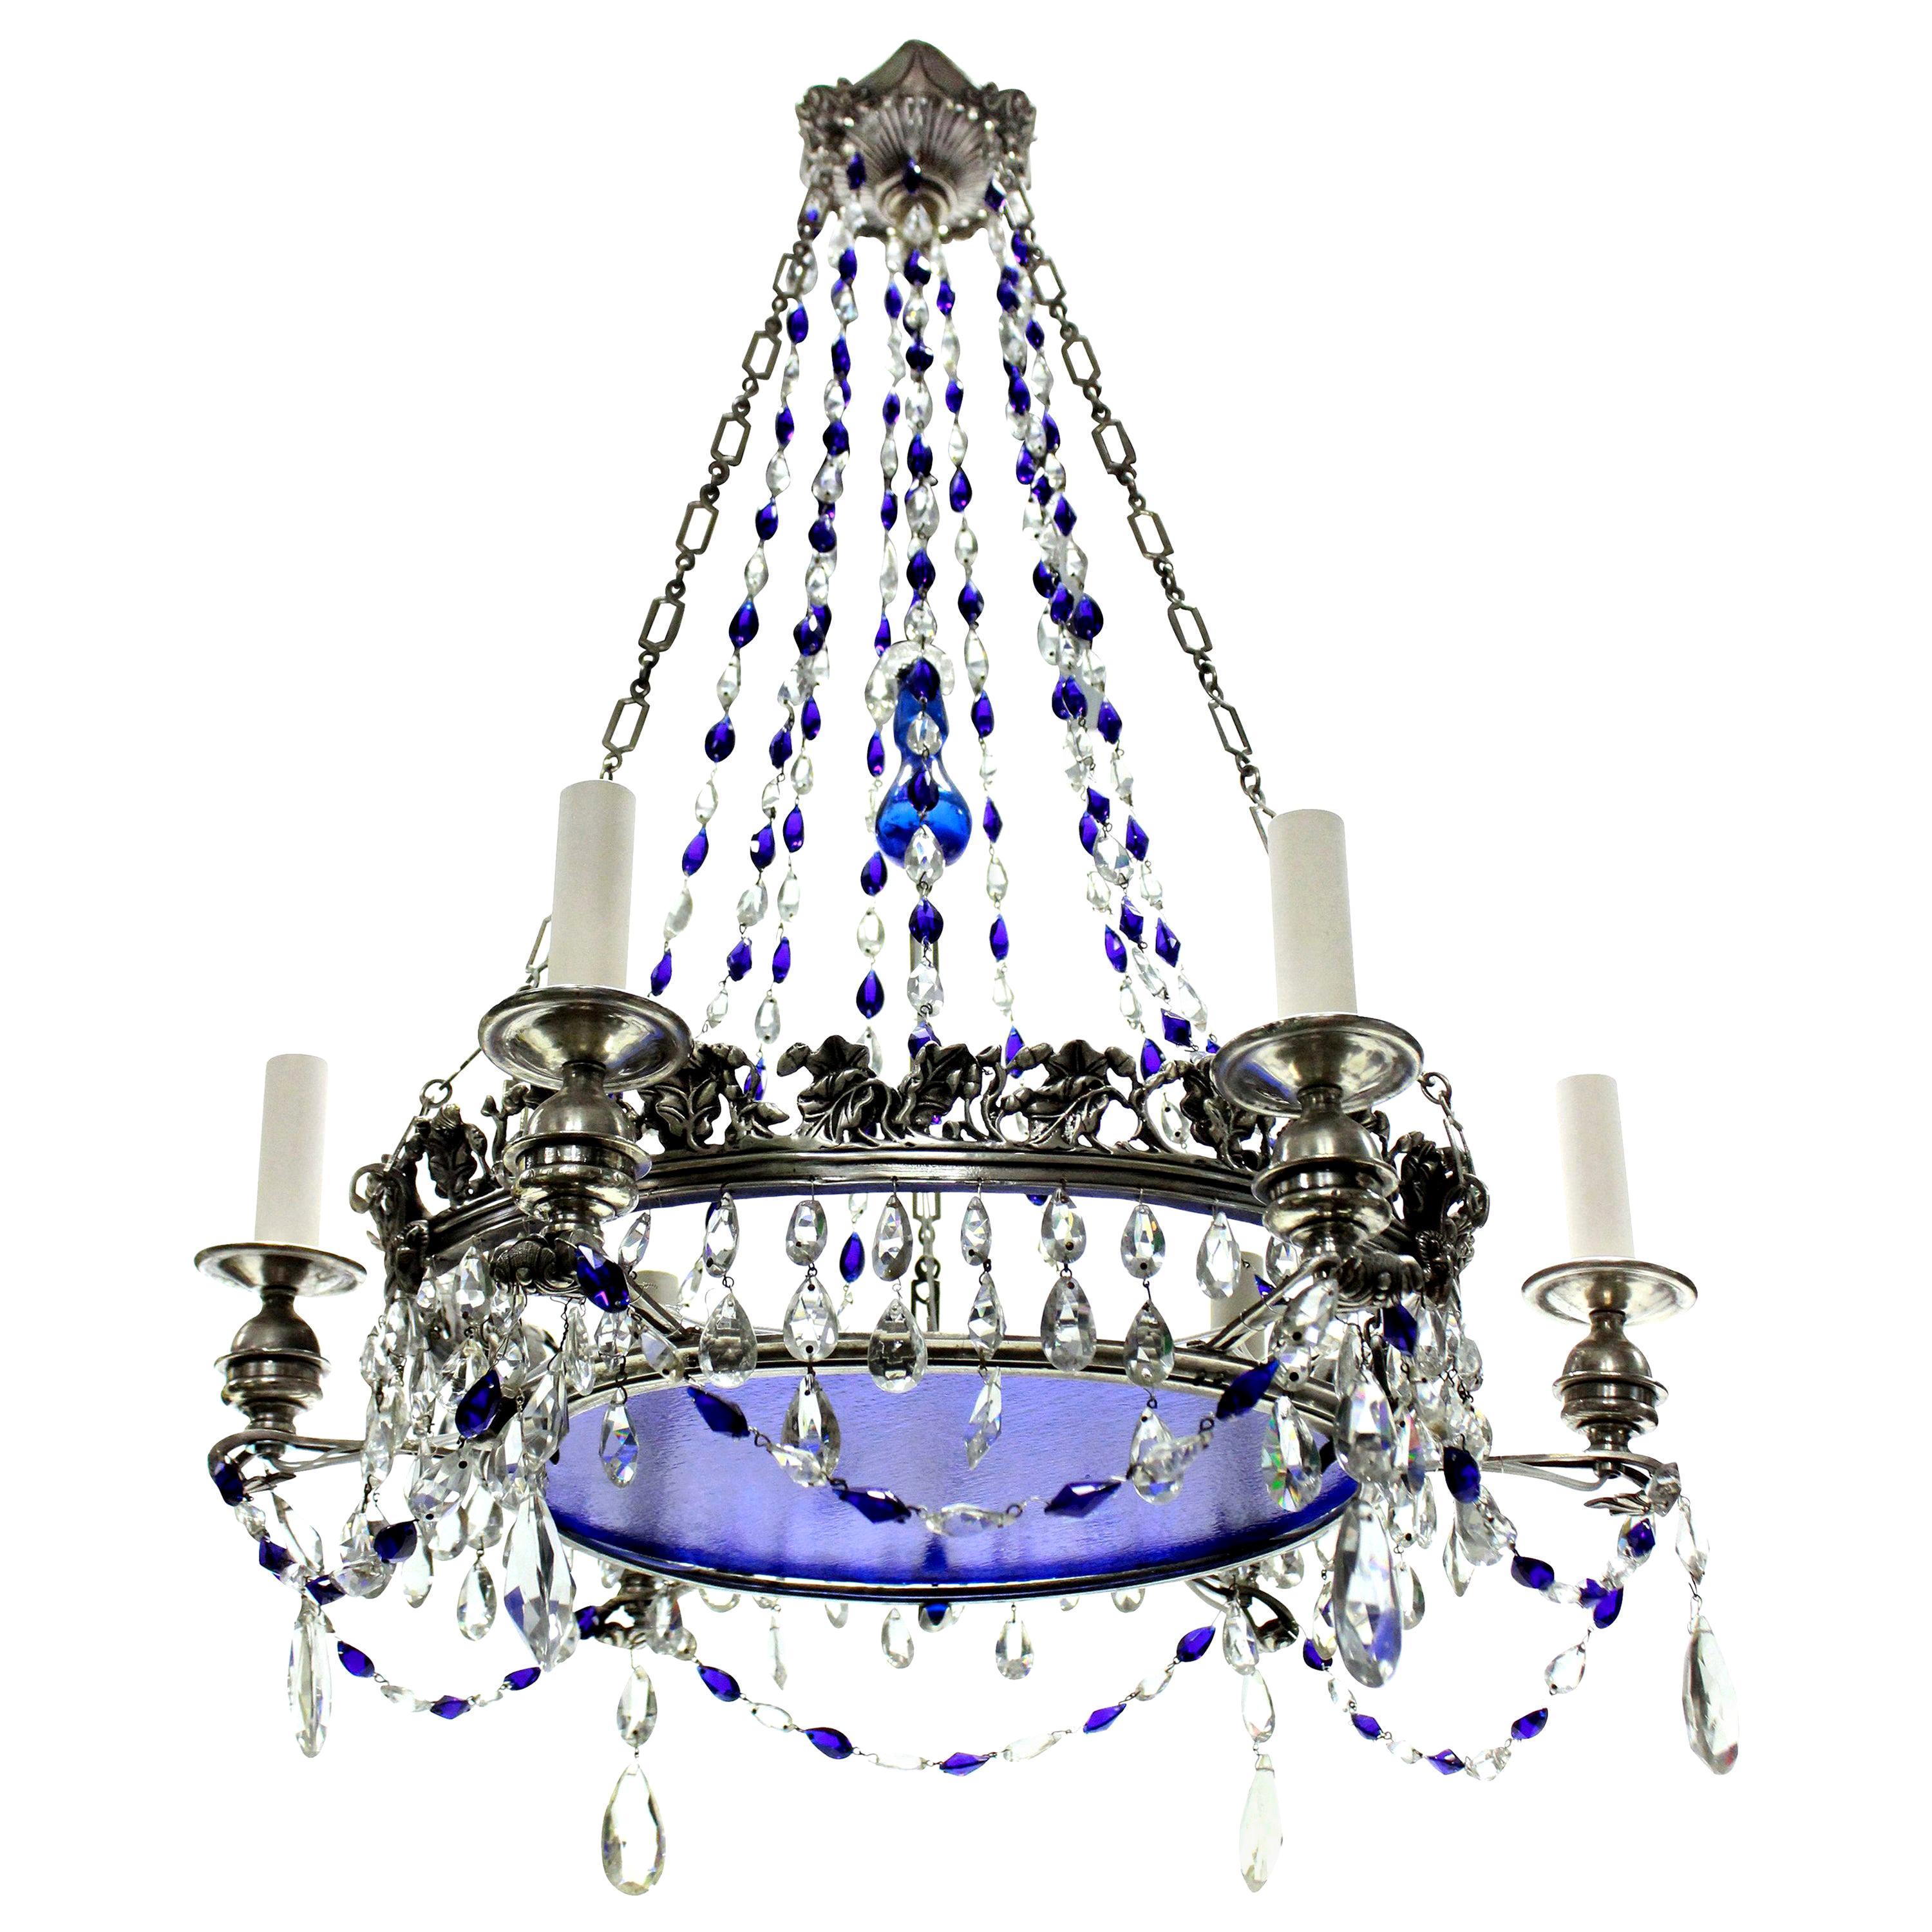 19th Century Russian Chandelier with Blue Glass